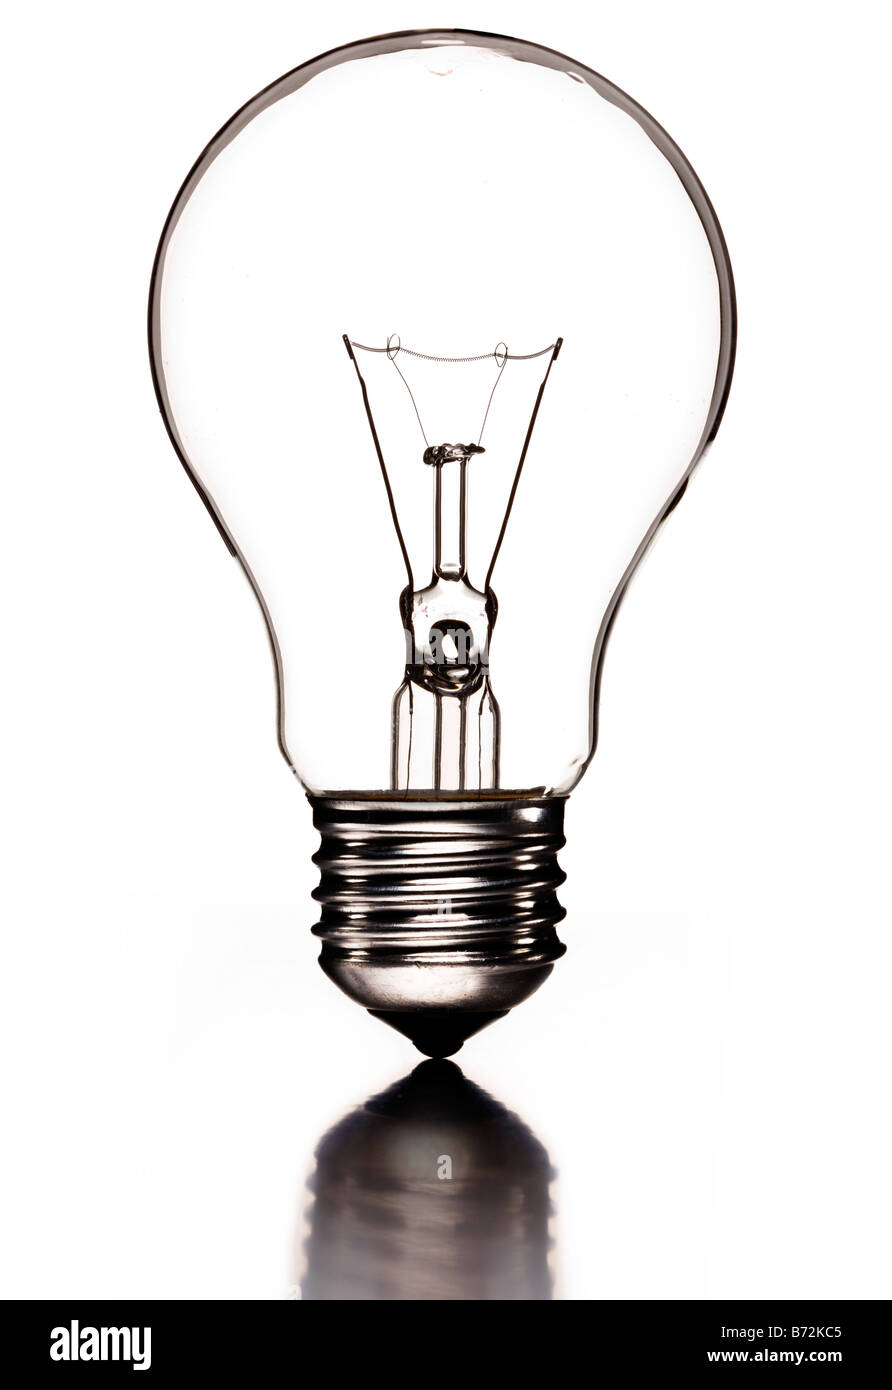 Transparent lightbulb with filament and Edison Screw or “ES” lamp fitting Stock Photo